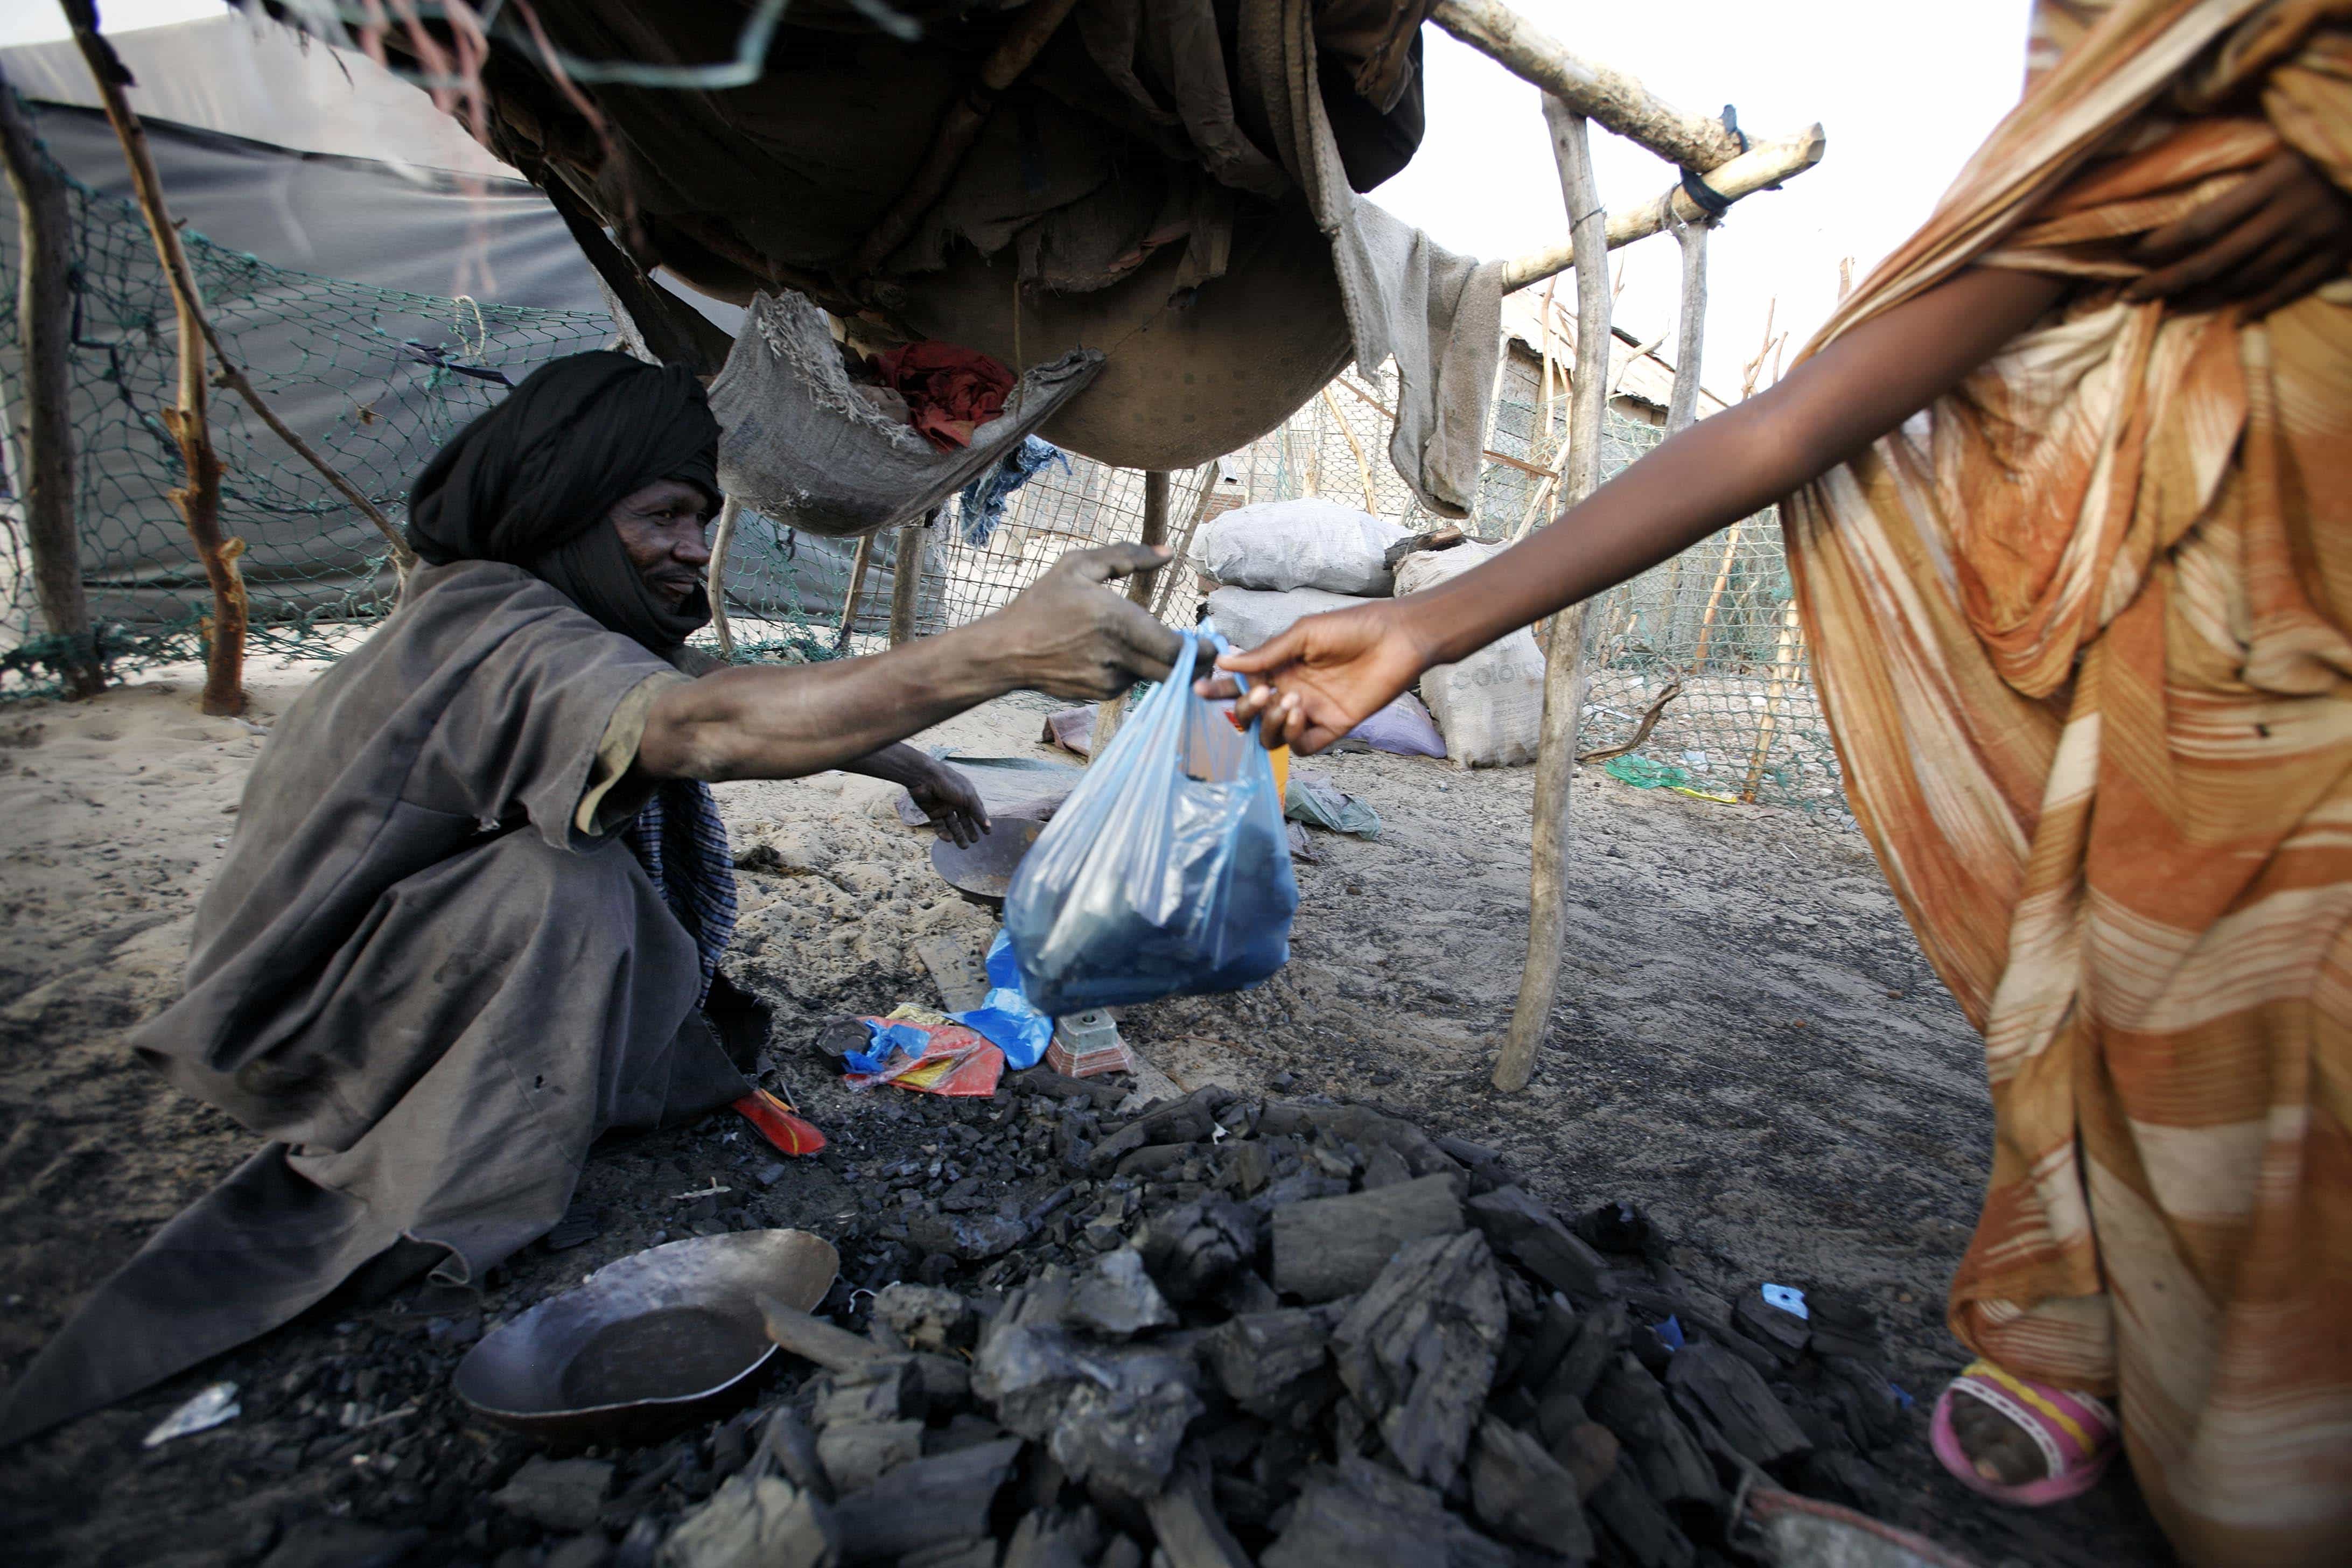 A Mauritanian man sells a bag of charcoal in the Keube slum in the capital Nouakchott in this March 13, 2007 picture. , REUTERS/Finbarr O'Reilly